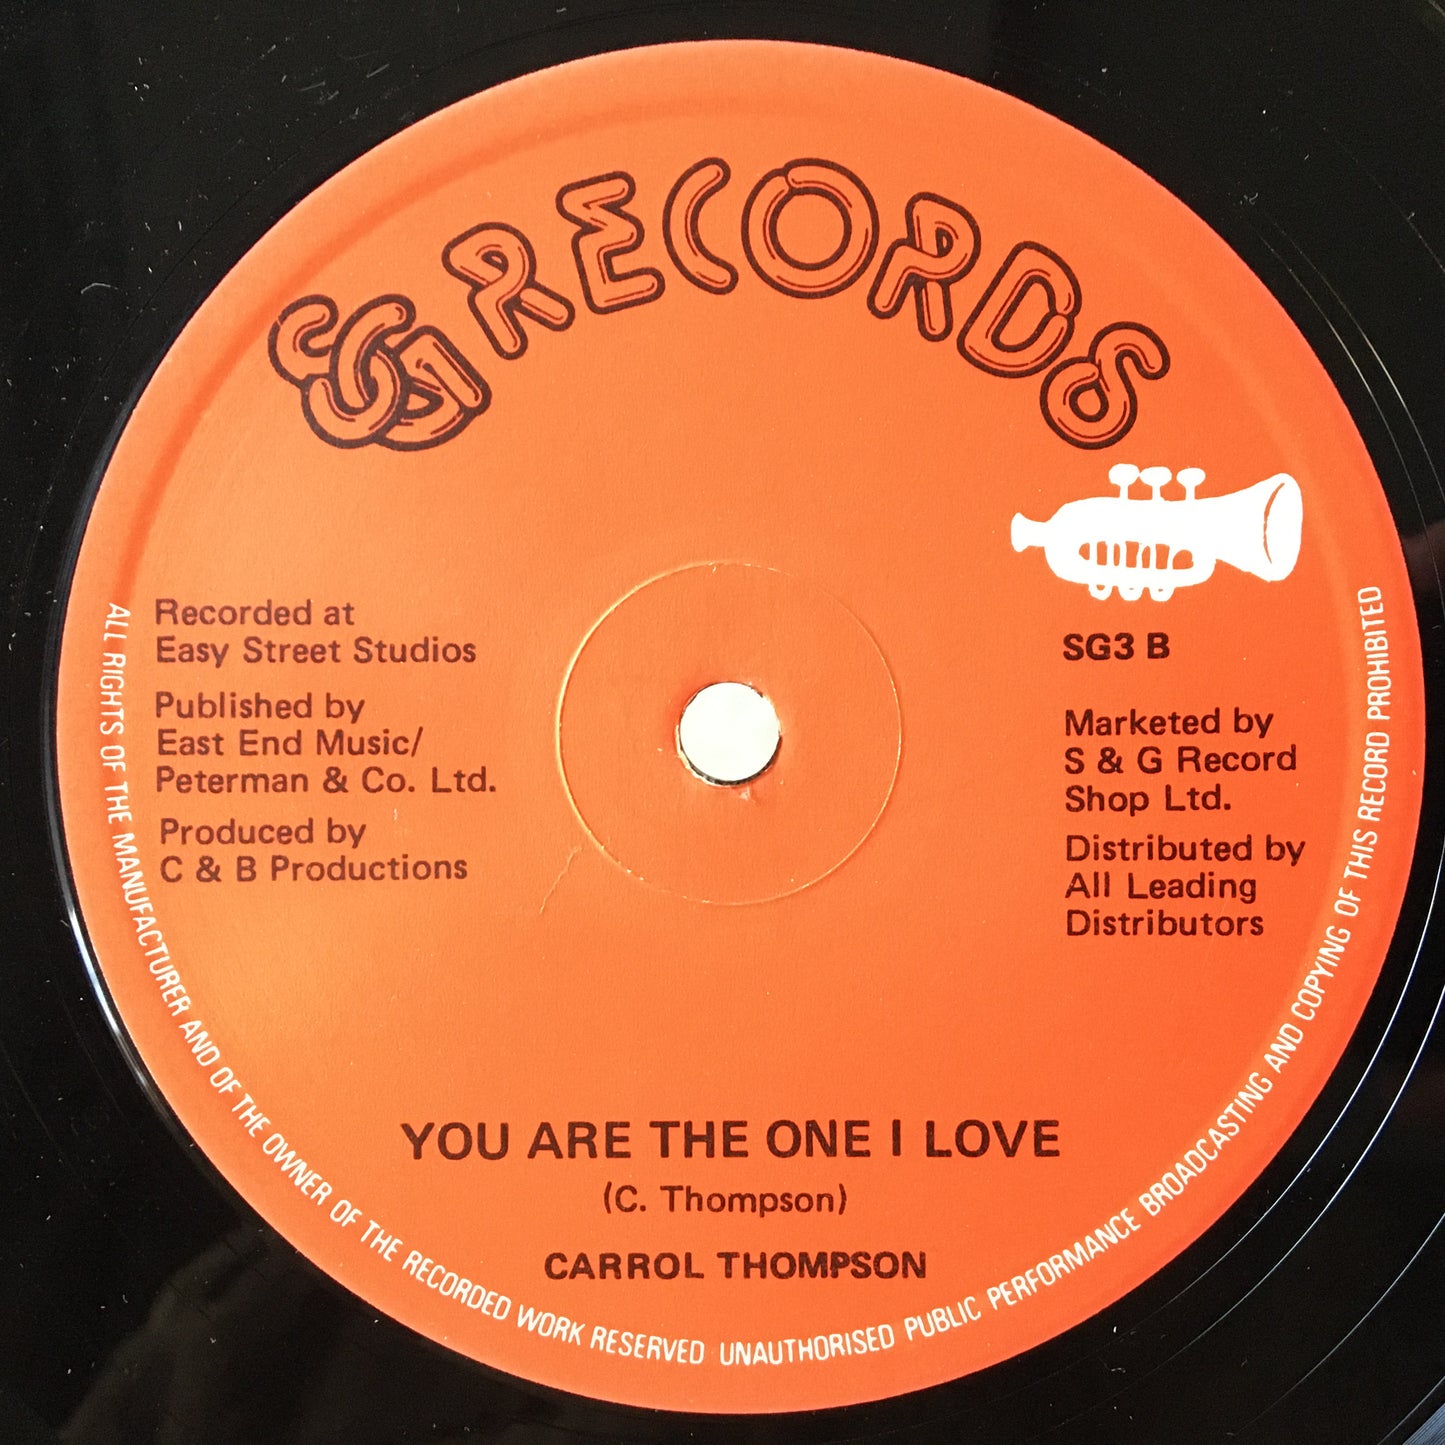 Carrol Thompson (Carroll) – Hopelessley Without You / You Are The One I Love